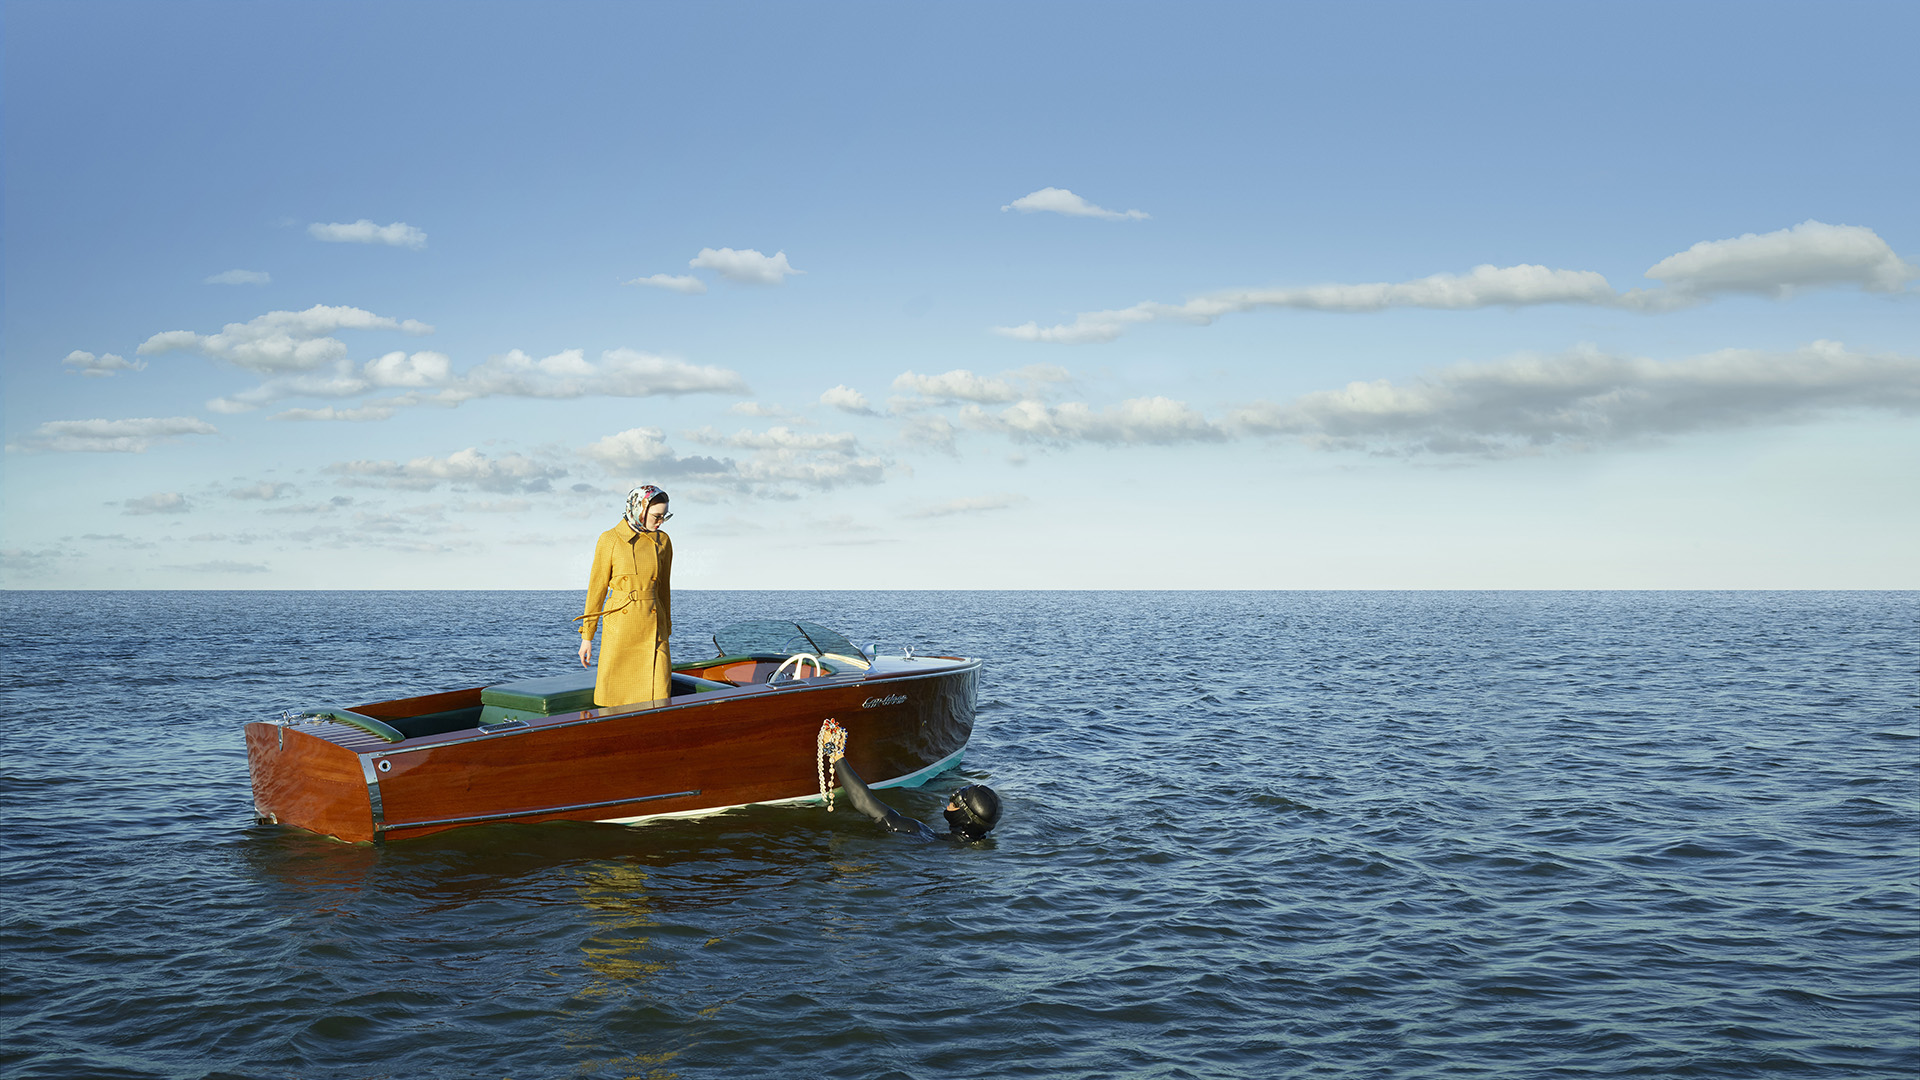 echelon seaport woman in boat with yellow coat full image